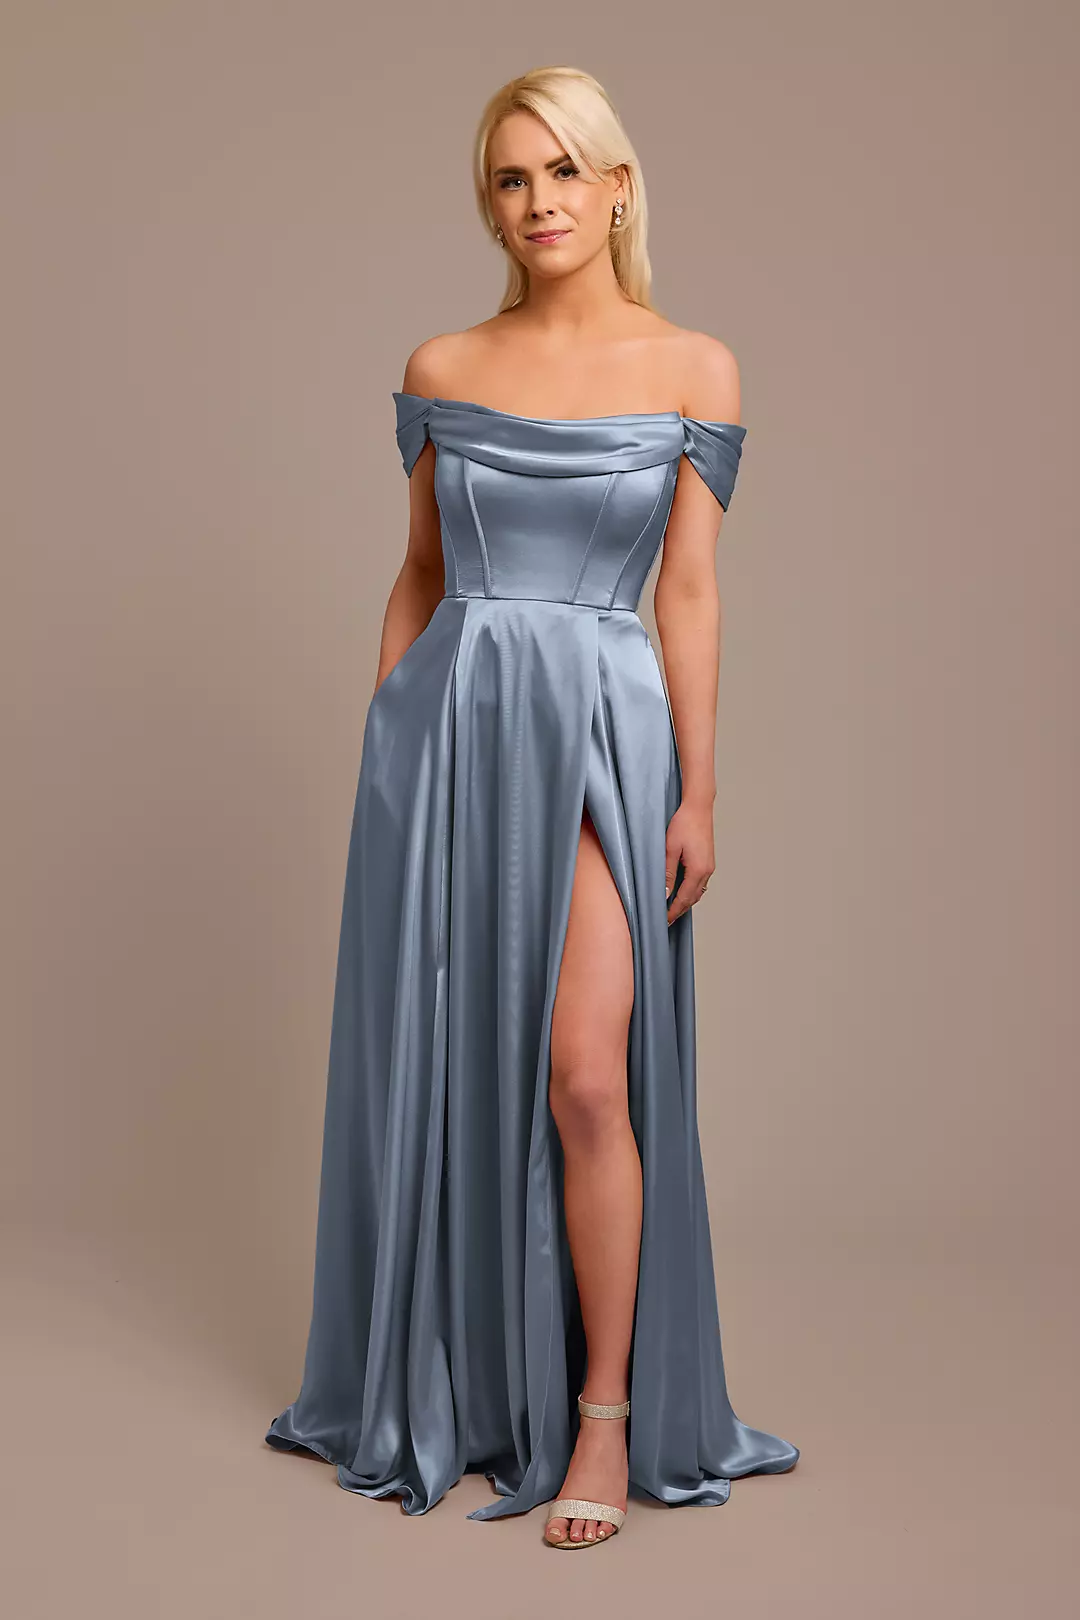 Charmeuse Cowl Off-the-Shoulder Bridesmaid Dress Image